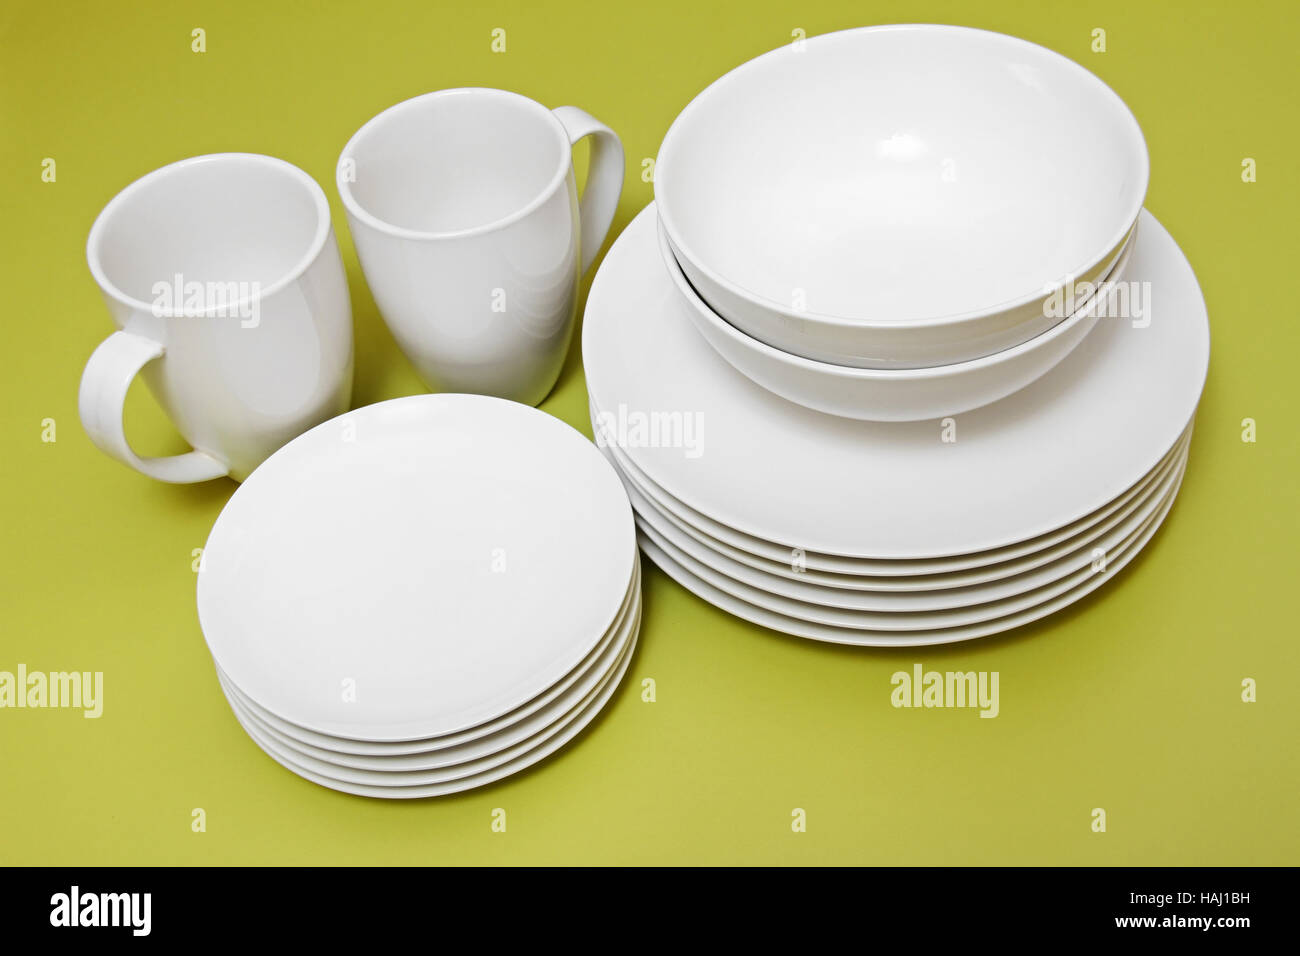 clean plates bowls and cups on green table Stock Photo